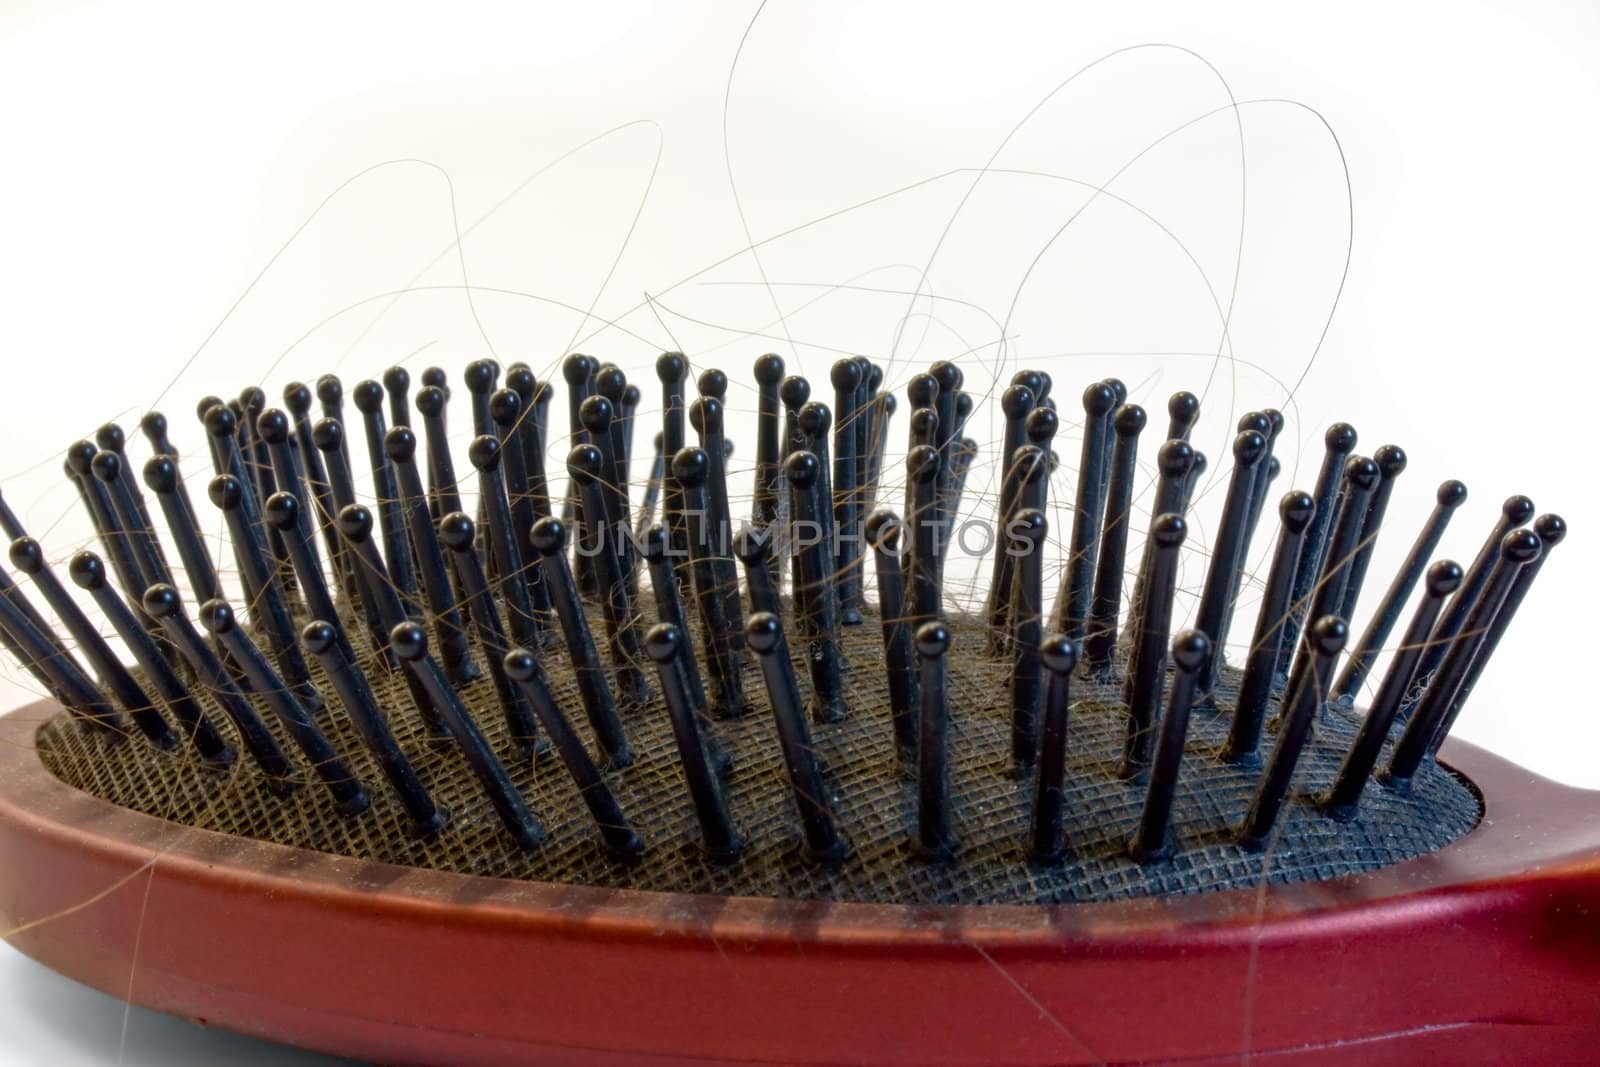 Hair on a hairbrush. A photo close up on a white background.